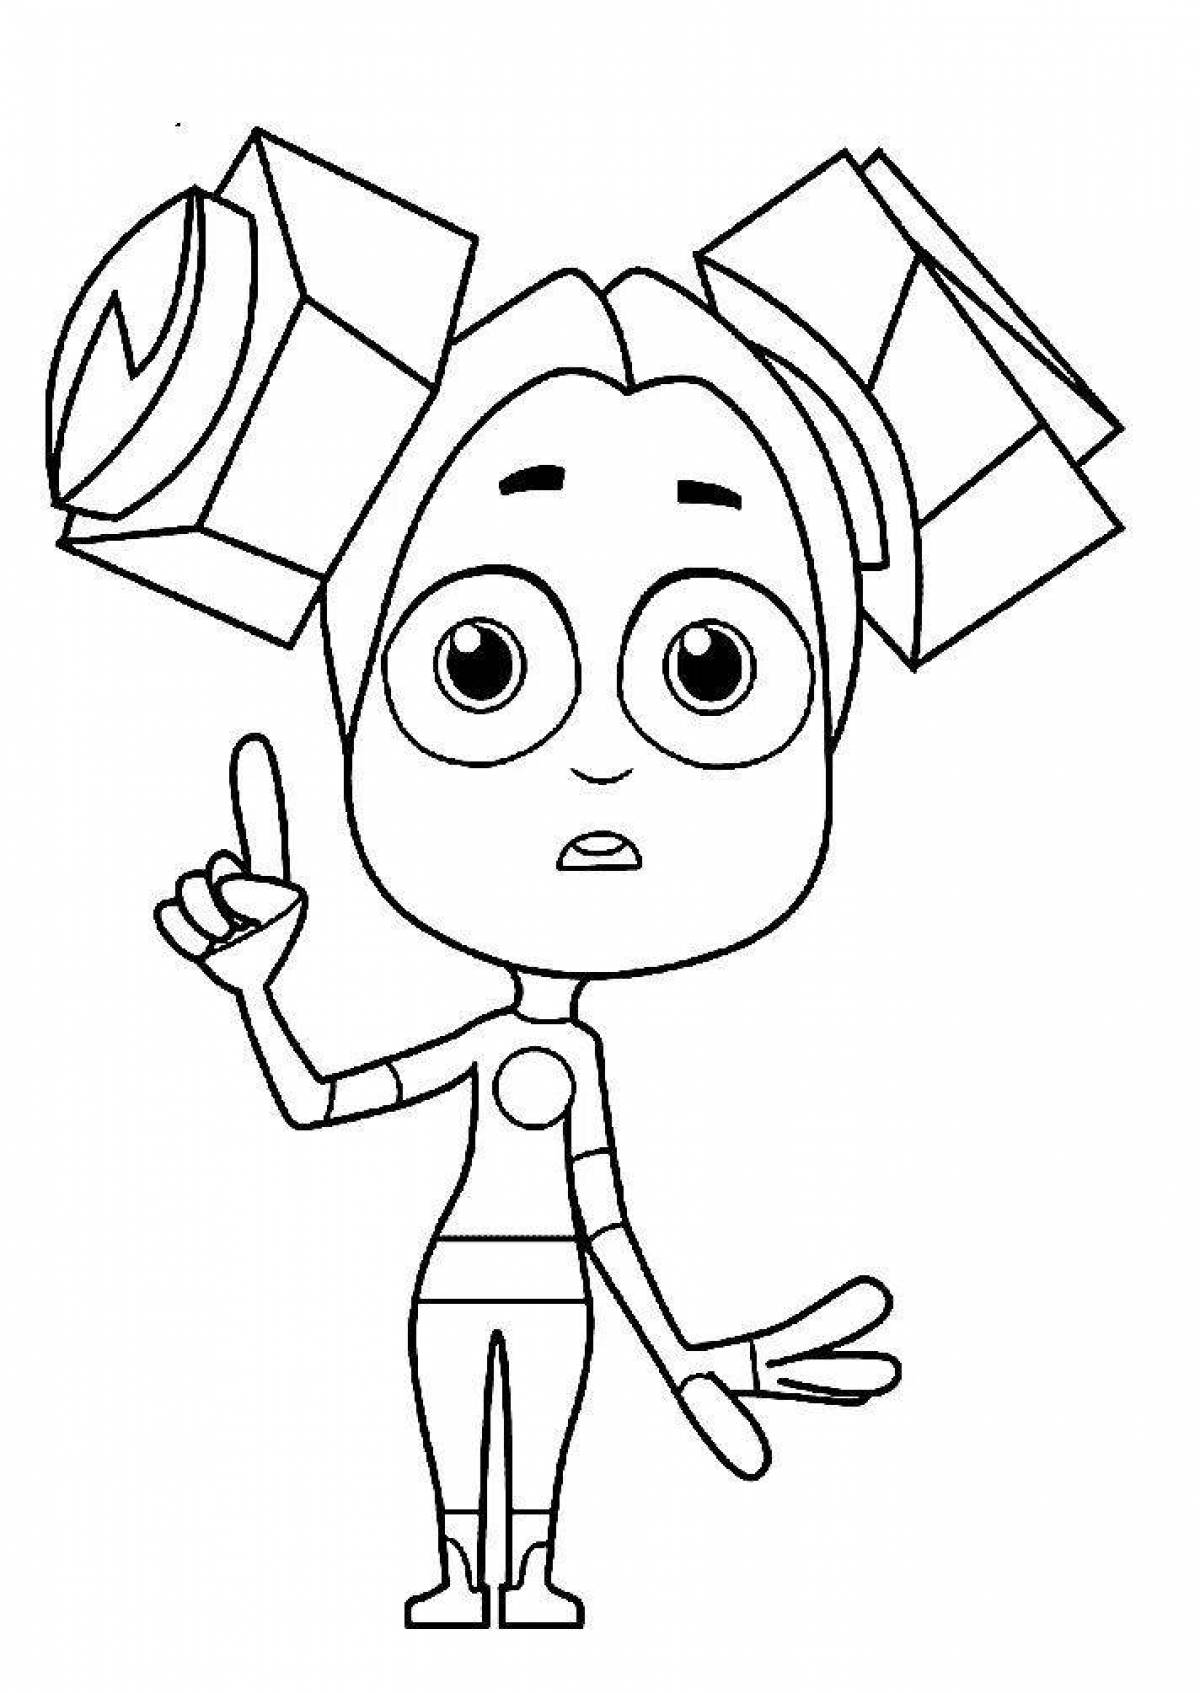 Awesome Fixies Coloring Pages for Girls